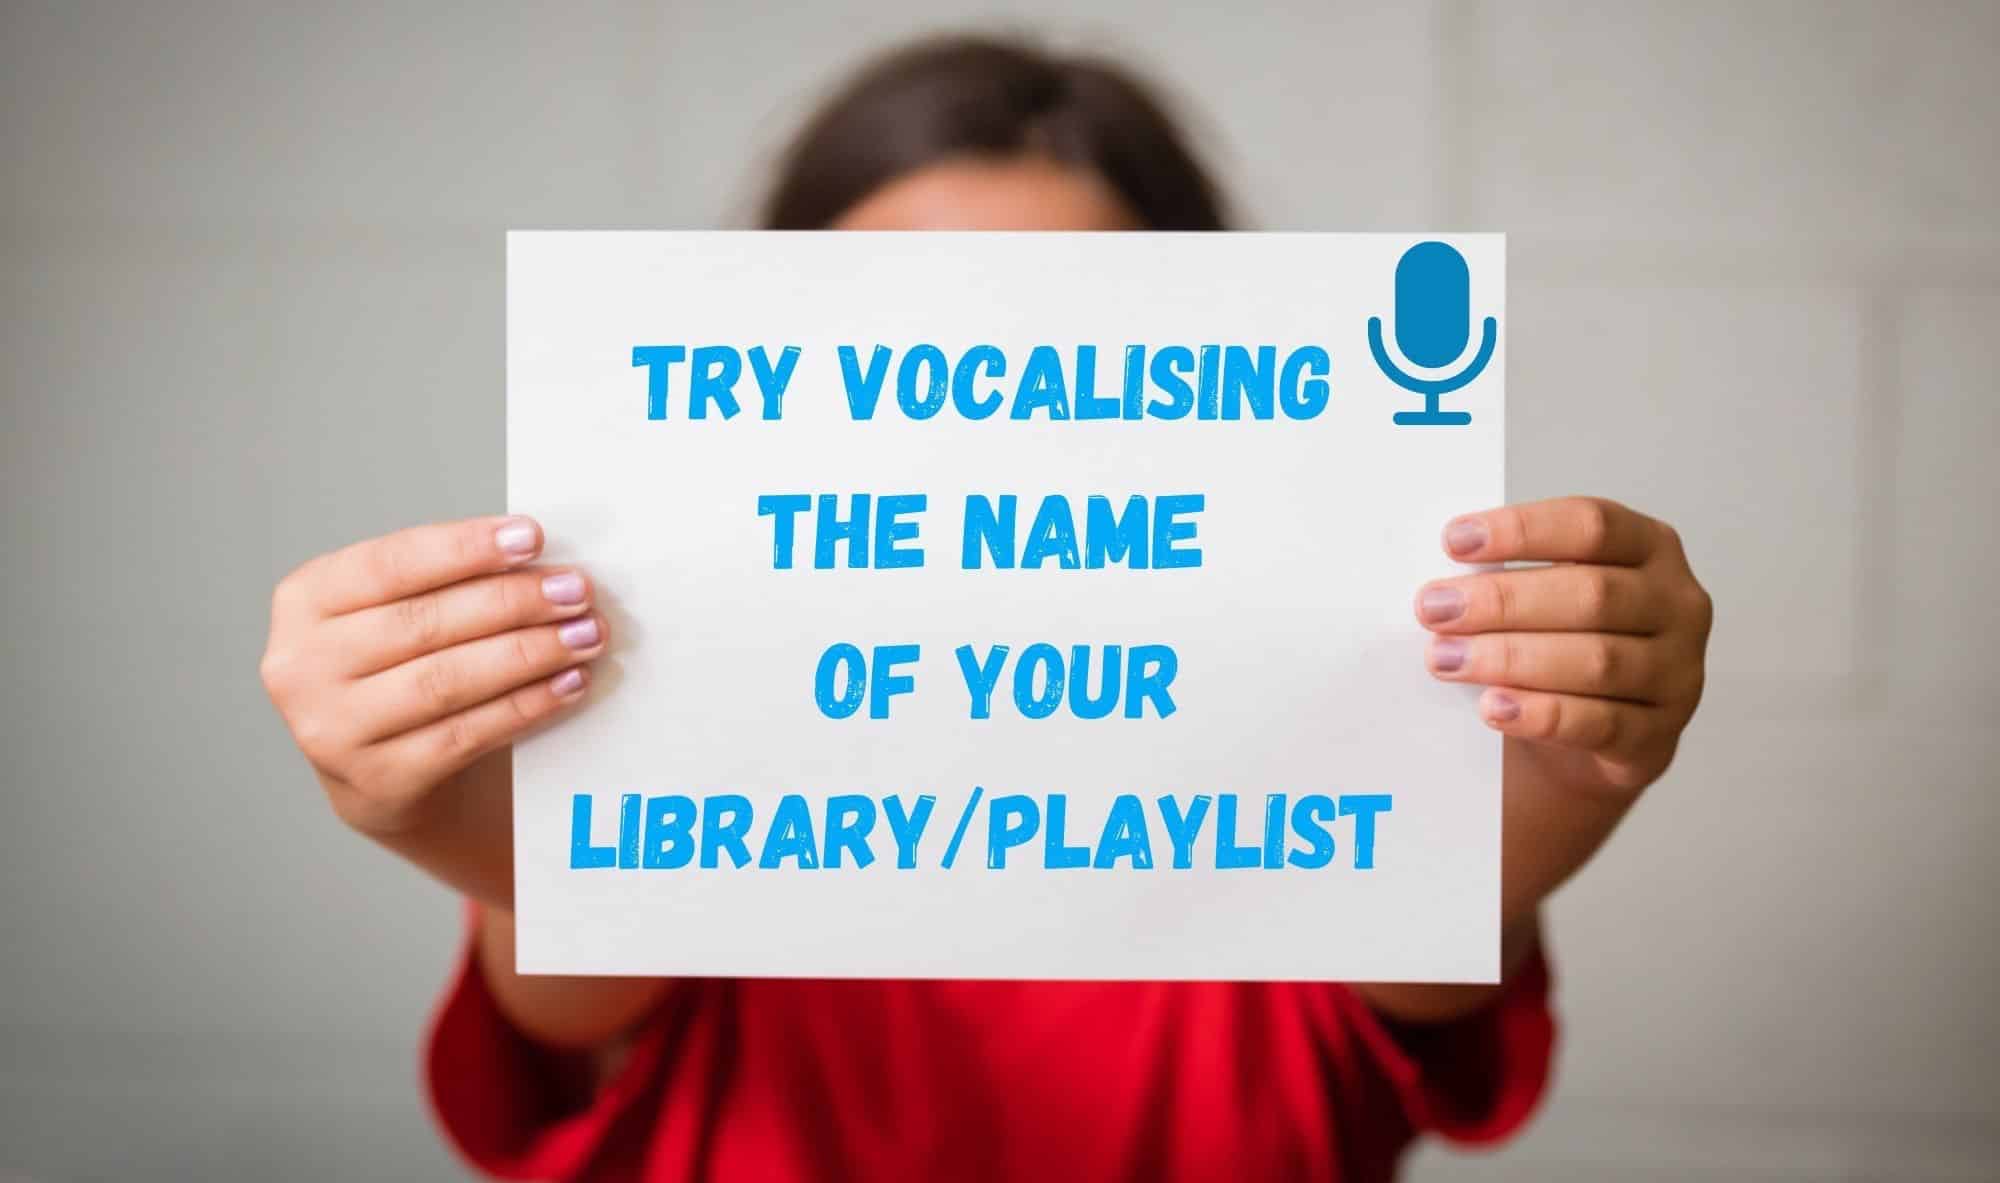 Try vocalising the name of your library playlist 